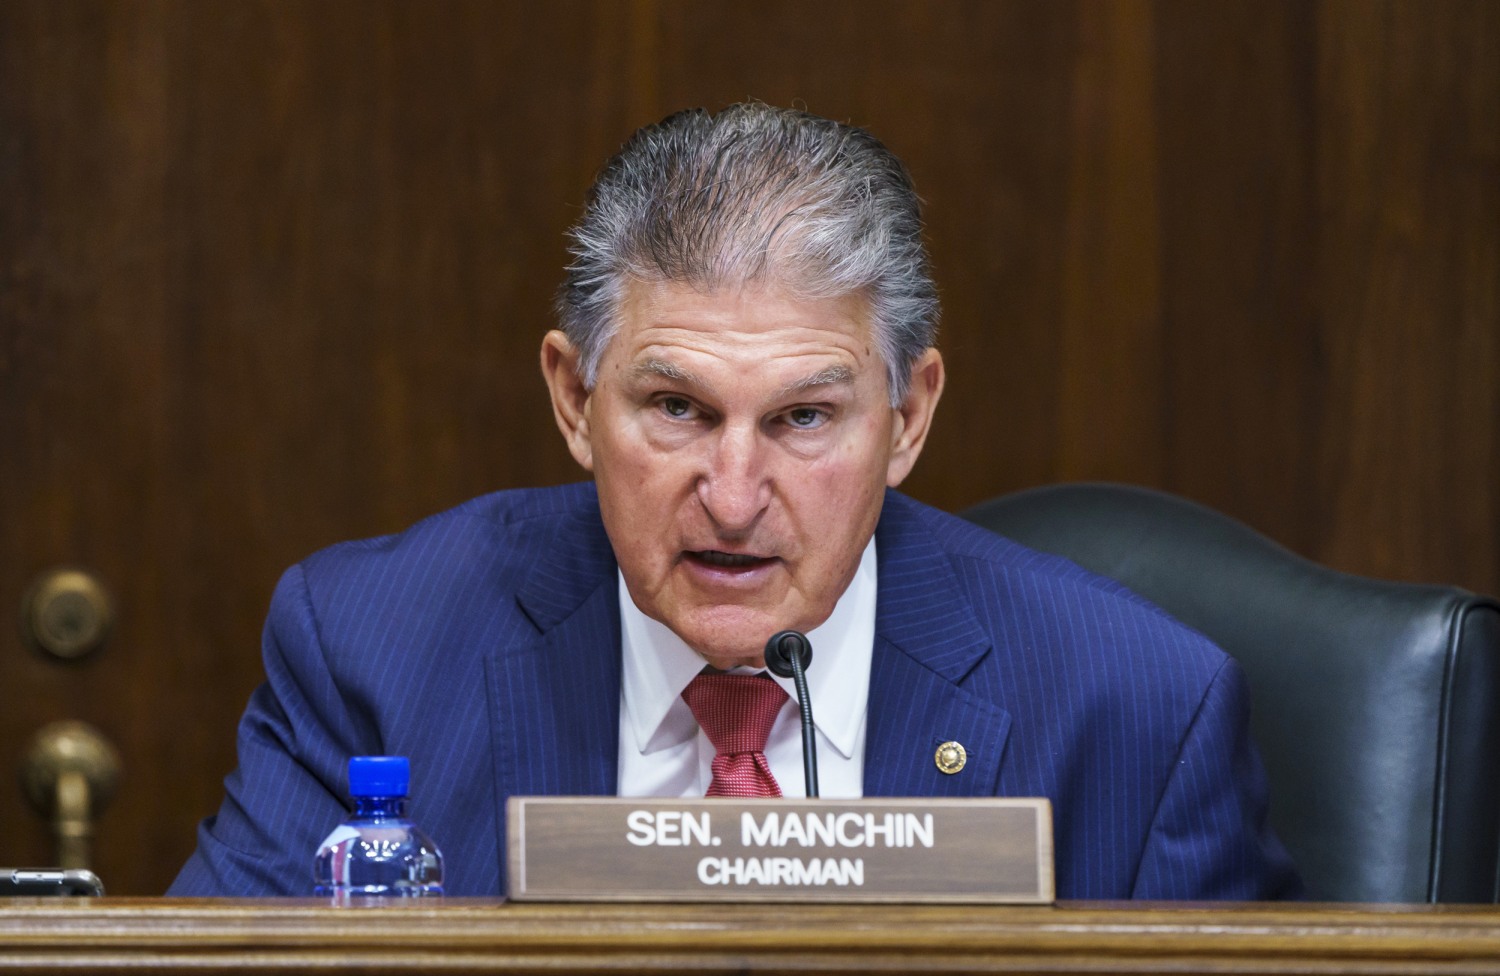 The unfortunate objective Joe Manchin prioritizes over governing